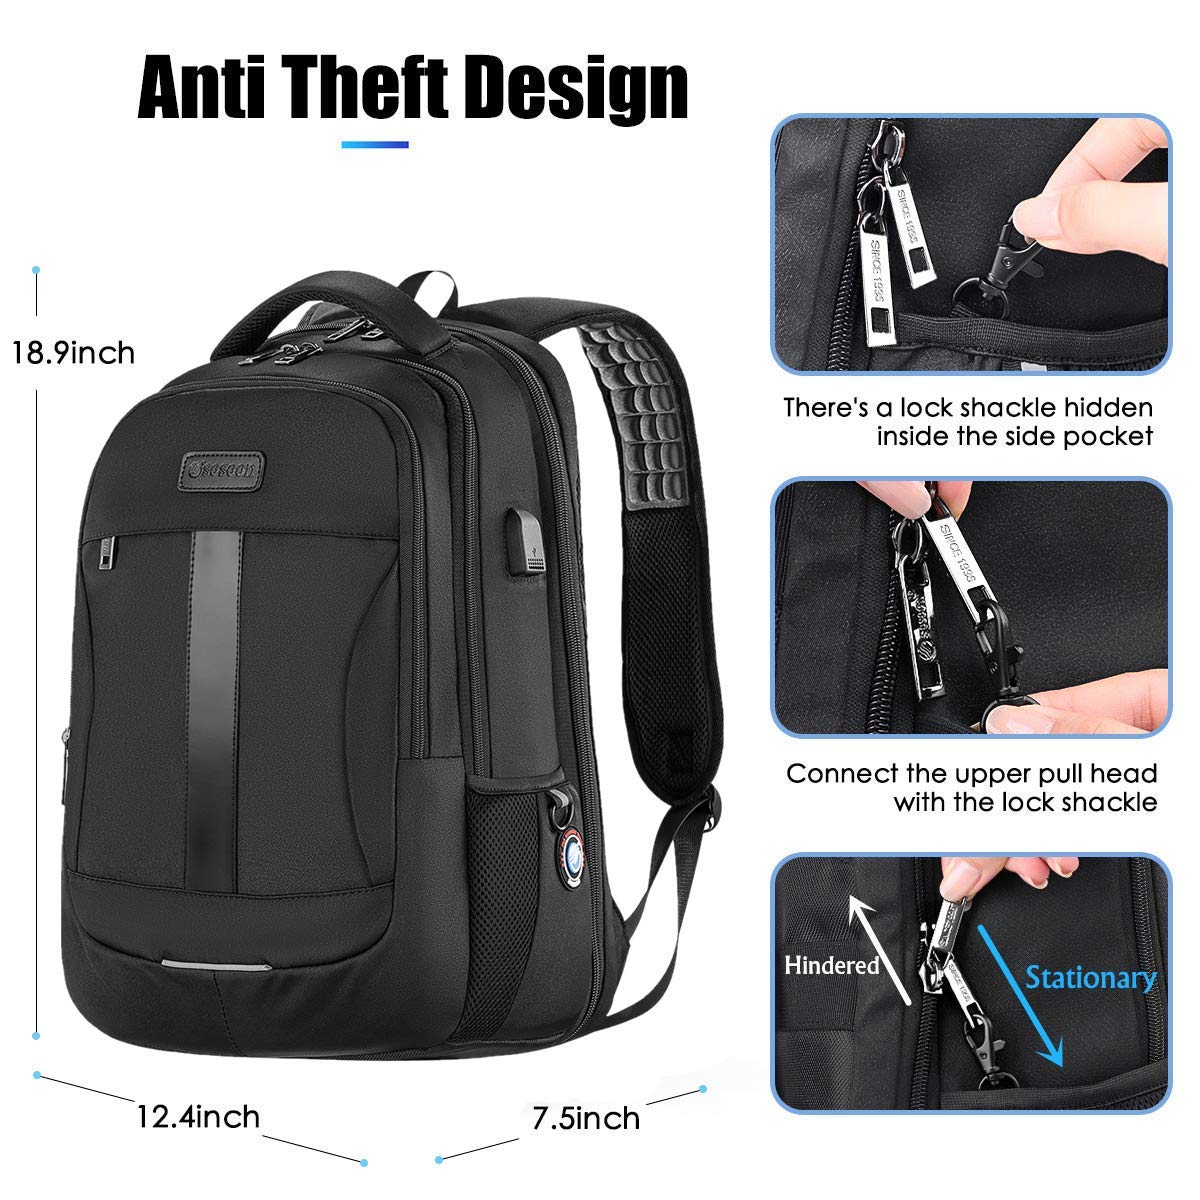 Sosoon Laptop Backpack, 15.6-17 Inch Travel Backpack for Laptop and Notebook, High School College Bookbag for Women Men Boys, Anti-Theft Water Resistant Bussiness Bag with USB Charging Port, Black